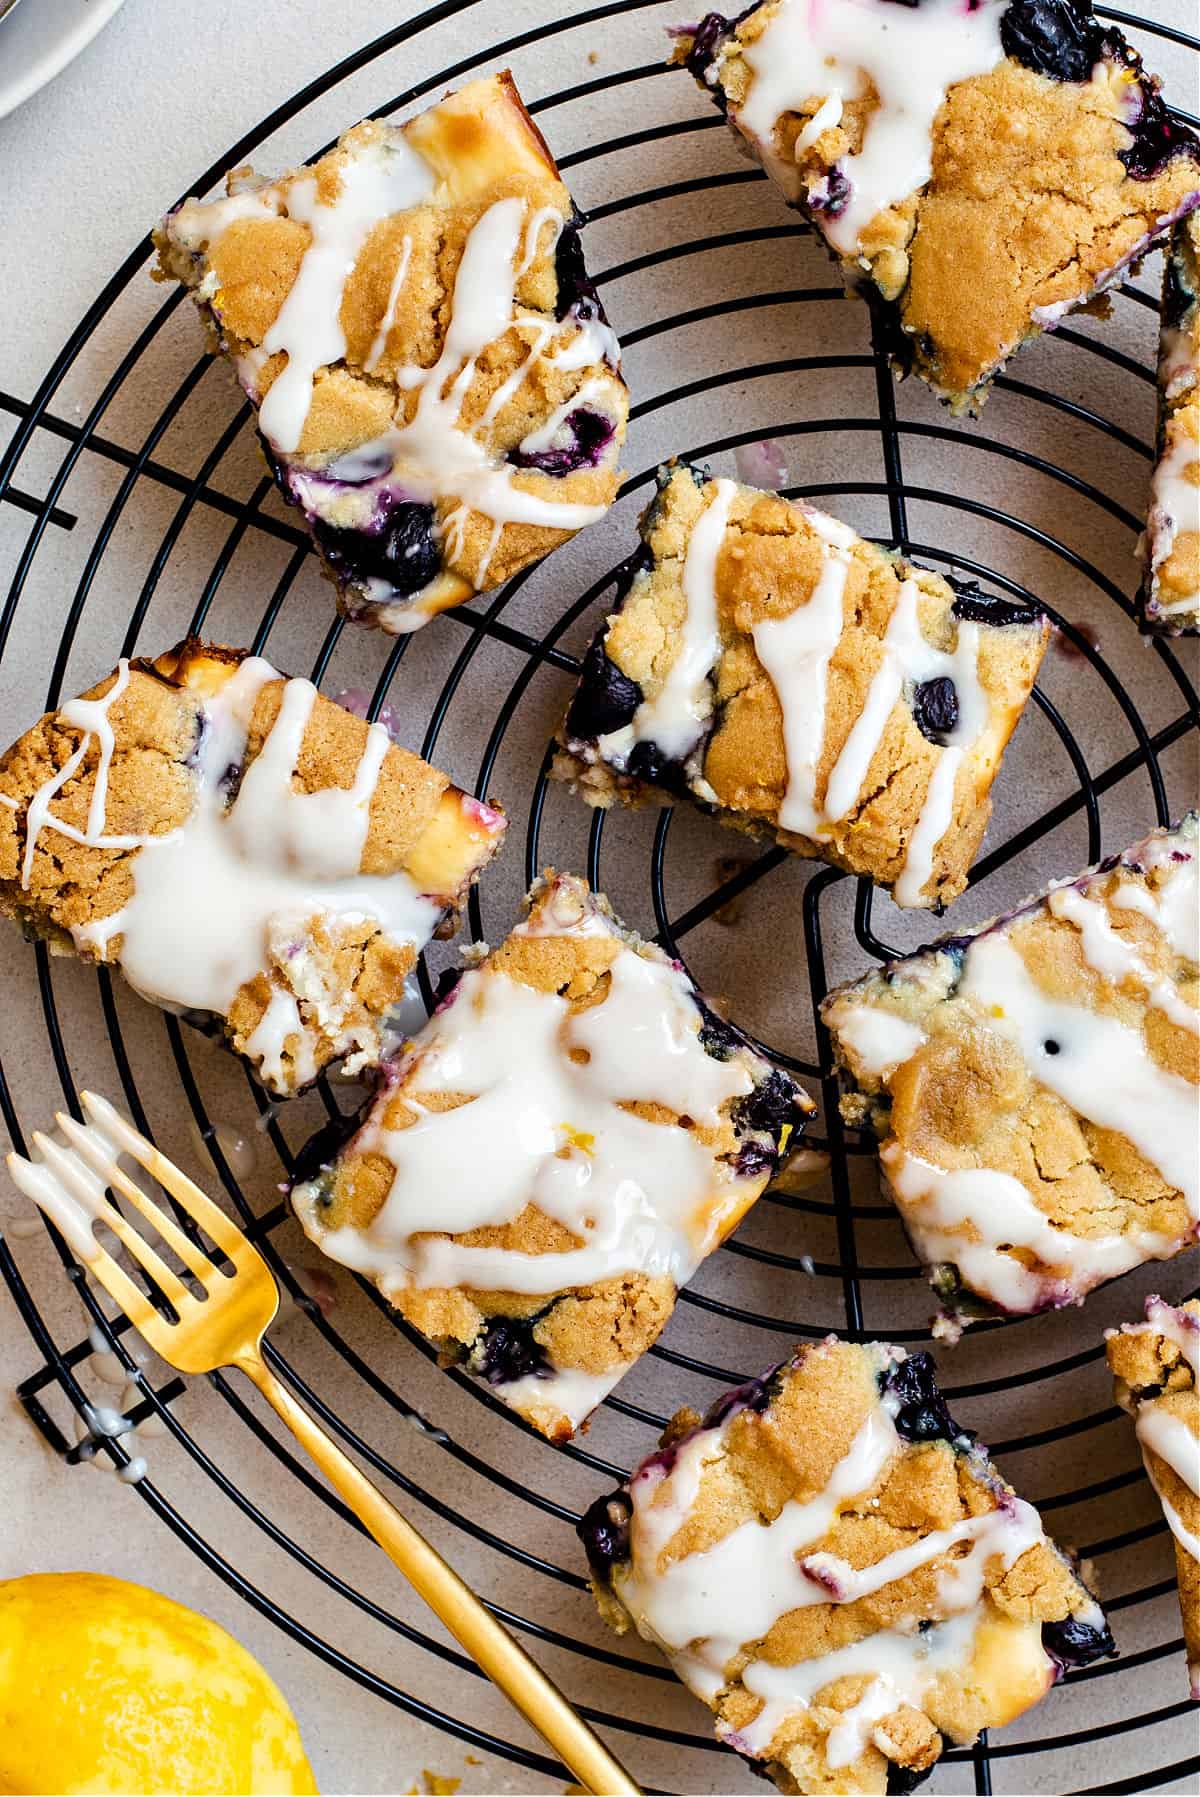 Blueberry cheesecake bars on a wire rack with a lemon glaze on top.